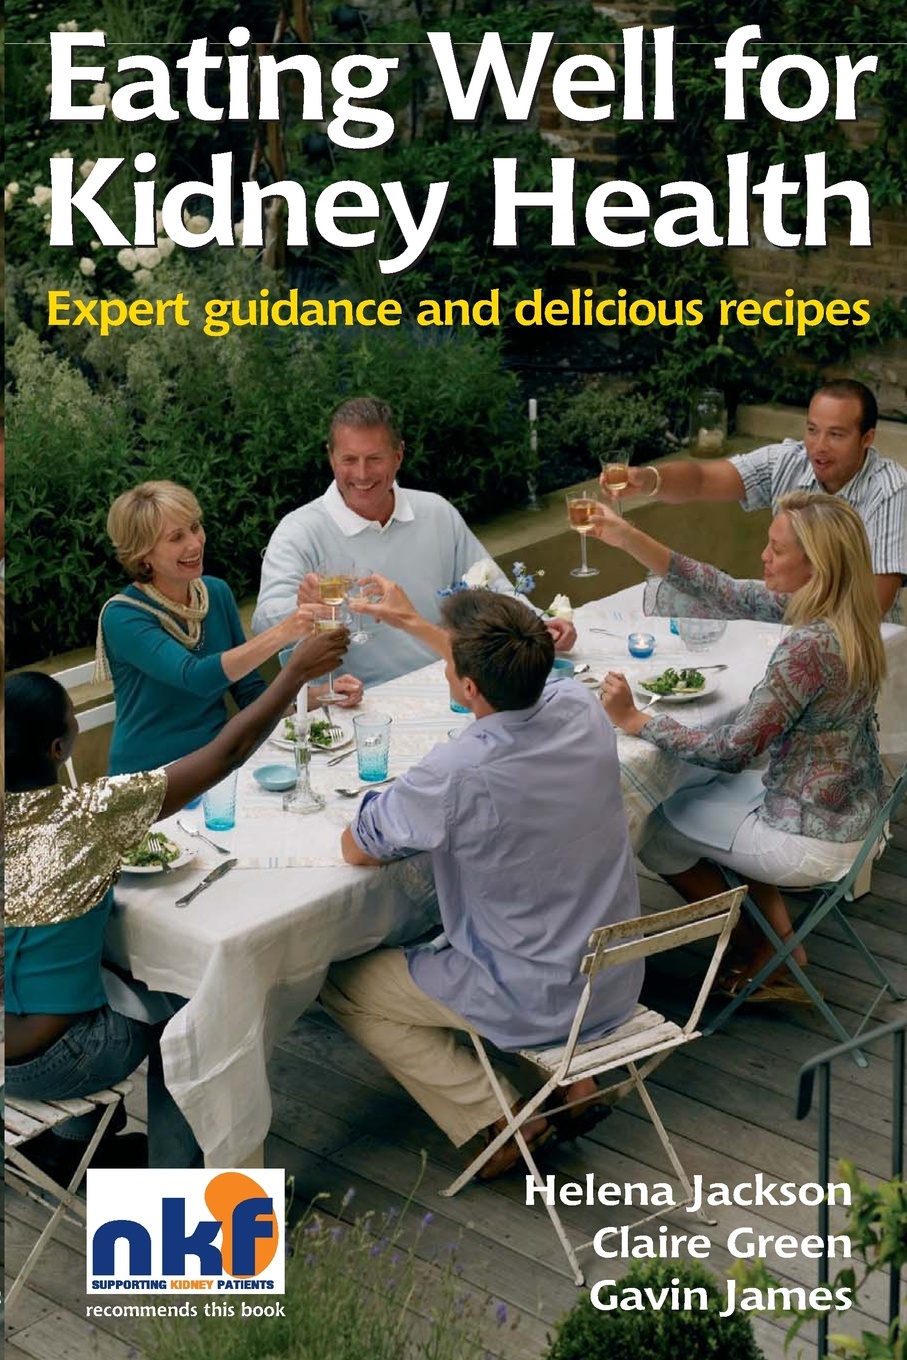 Eating Well for Kidney Health. Expert guidance and delicious recipes